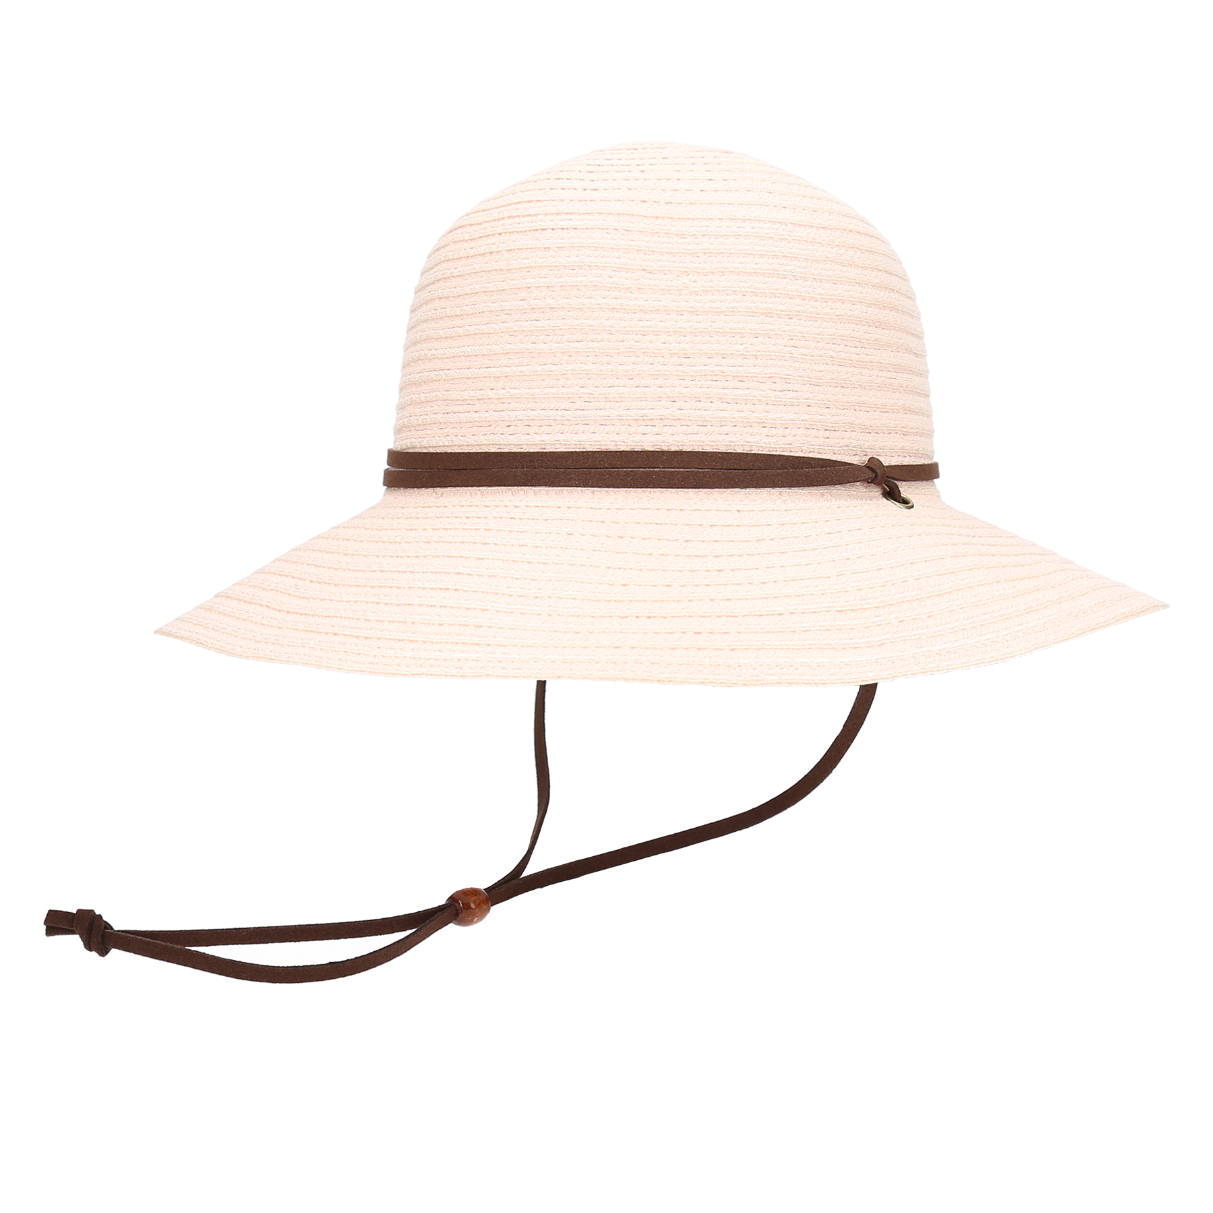 Wanderlust Breeze Crushable Straw Hat CTR Style:1357 – CTR Outdoors